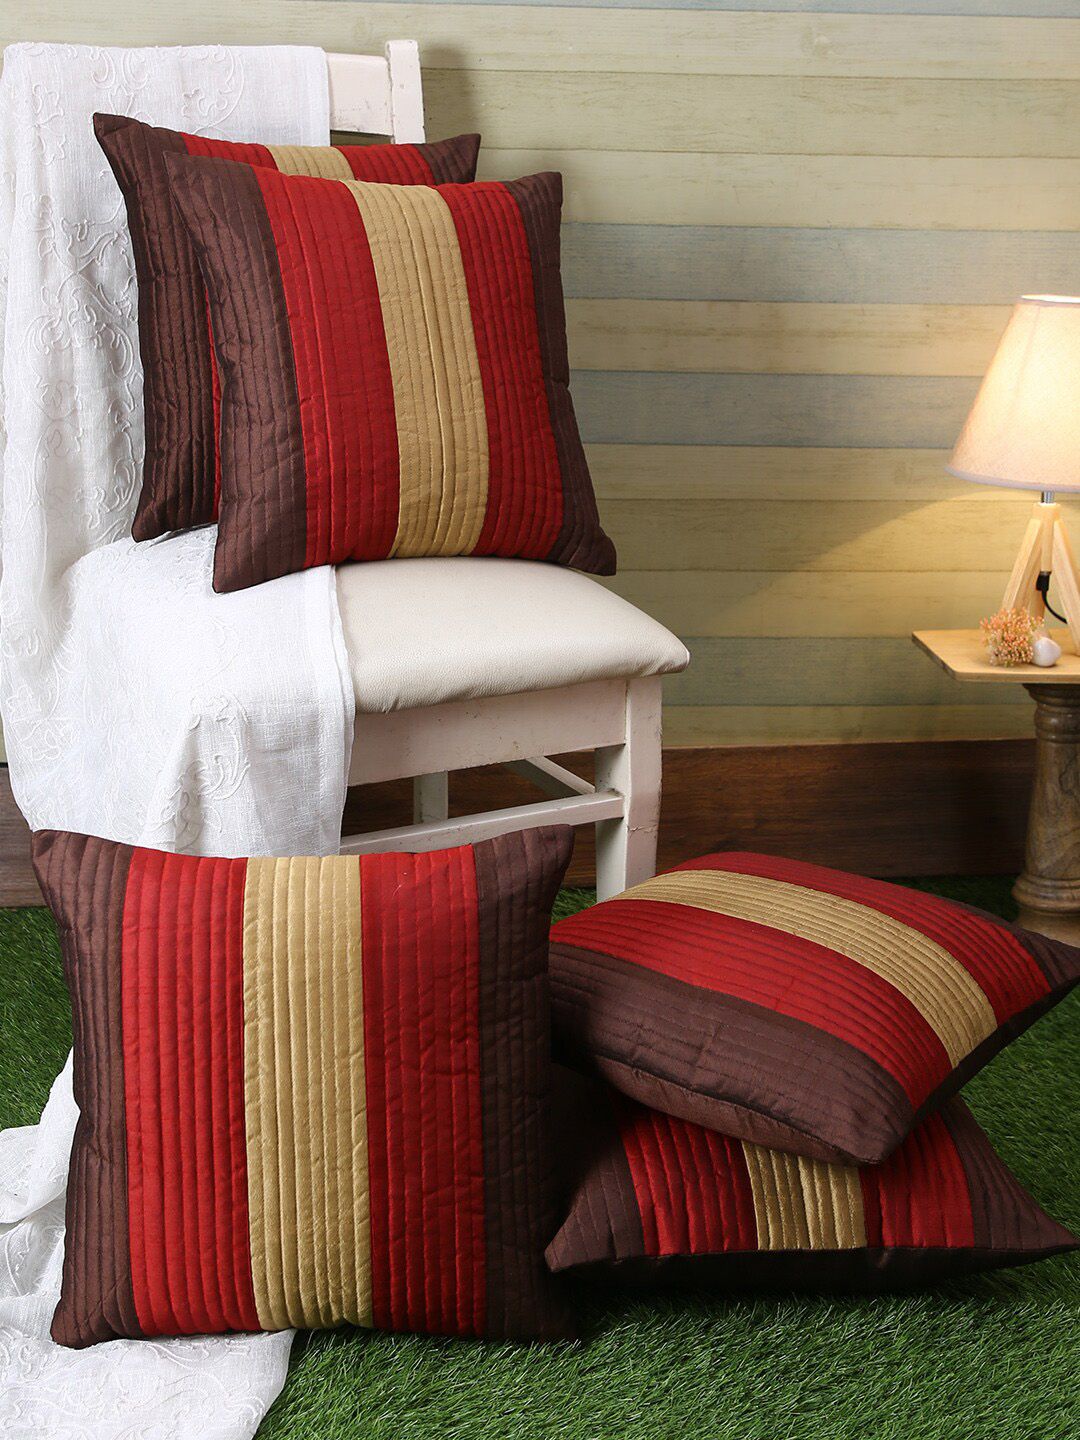 ROMEE Maroon & Beige Set of 5 Striped Square Cushion Covers Price in India